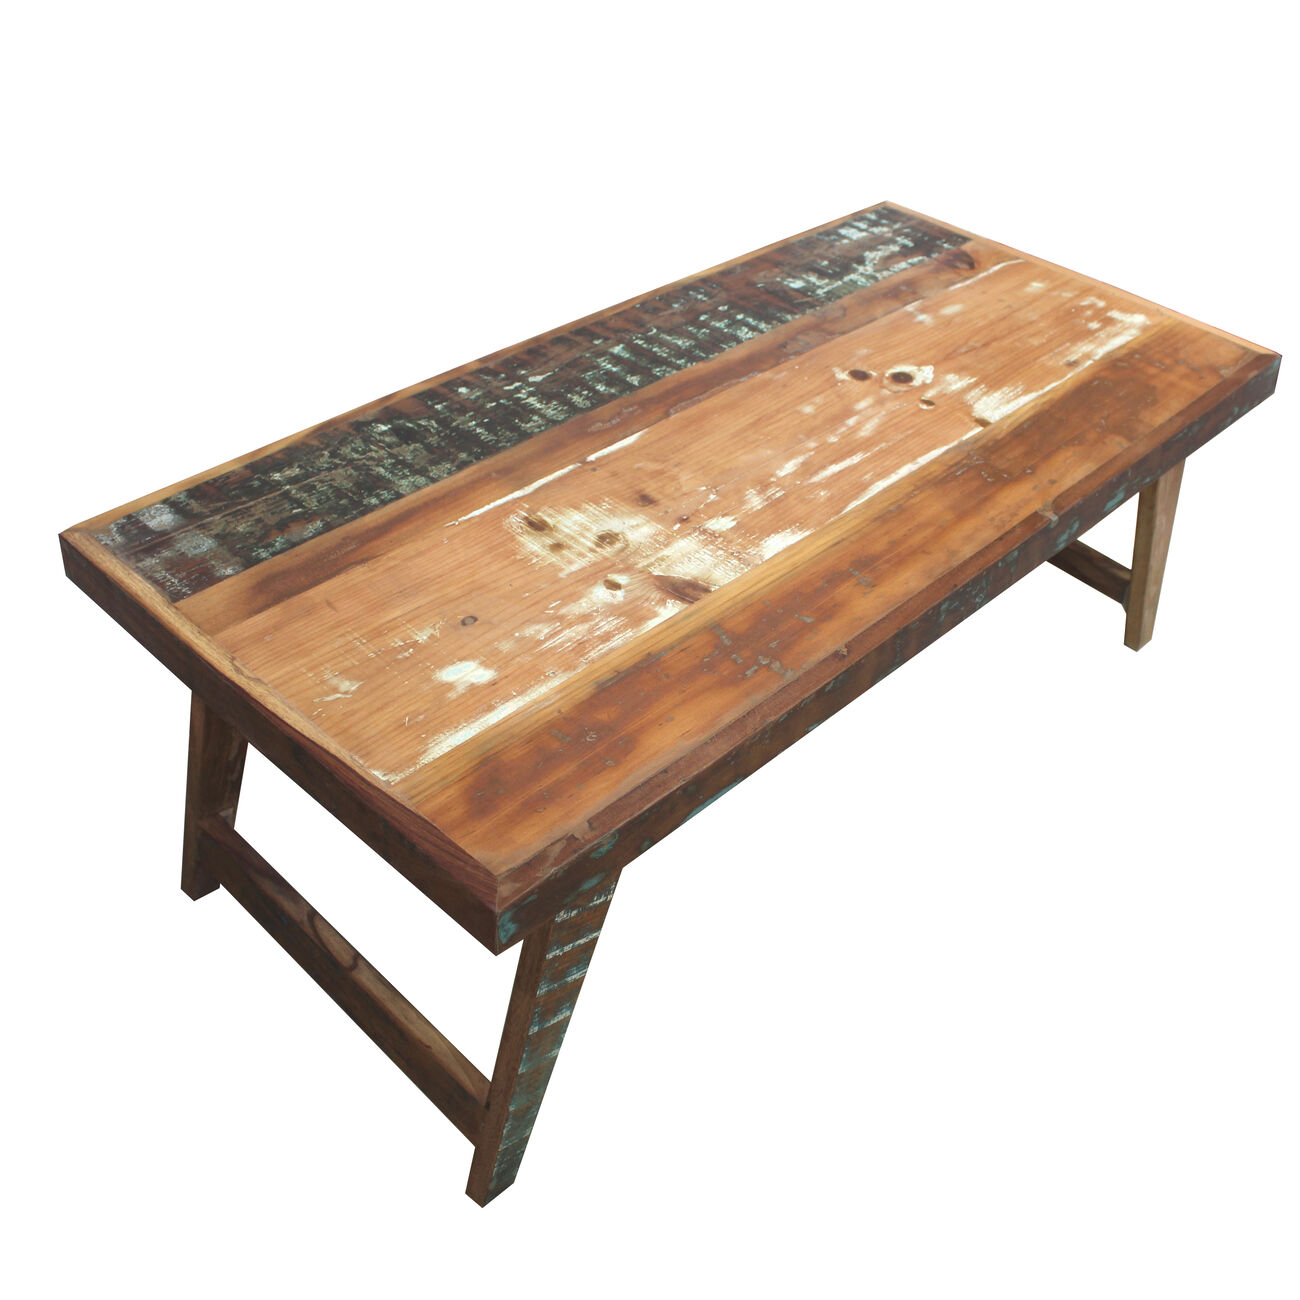 Rectangular Handcrafted Wooden Coffee Table with Slanted Tapered Legs, Distressed Brown